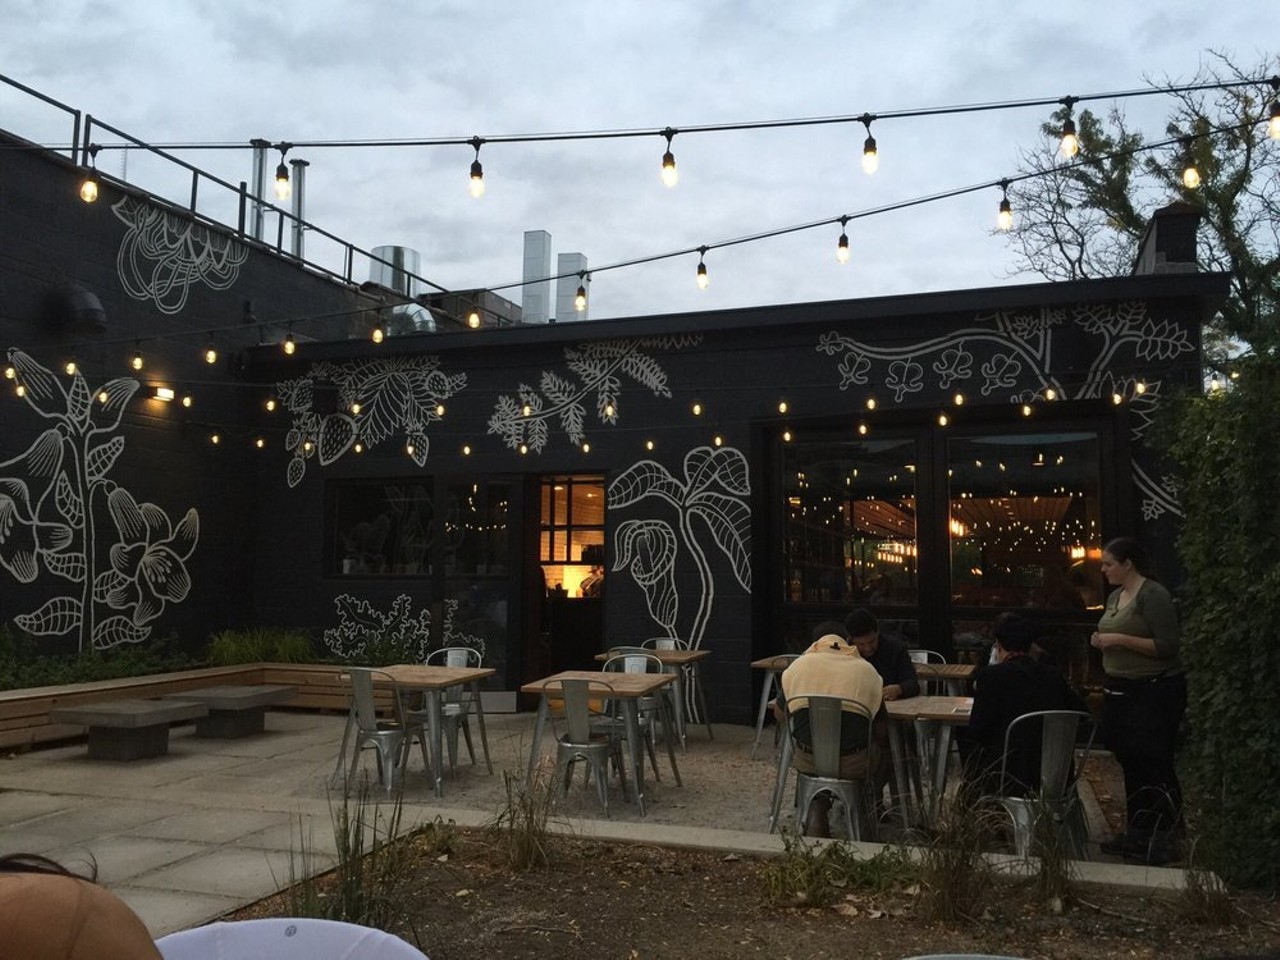 Selden Standard3921 2nd Ave, Detroit; (313) 438-5055
The award-winning Midtown eatery's patio is intimate and inviting. Not to mention it'll be perfect for the backdrop your next Instagram post. (Photo via Latia W. on Yelp)